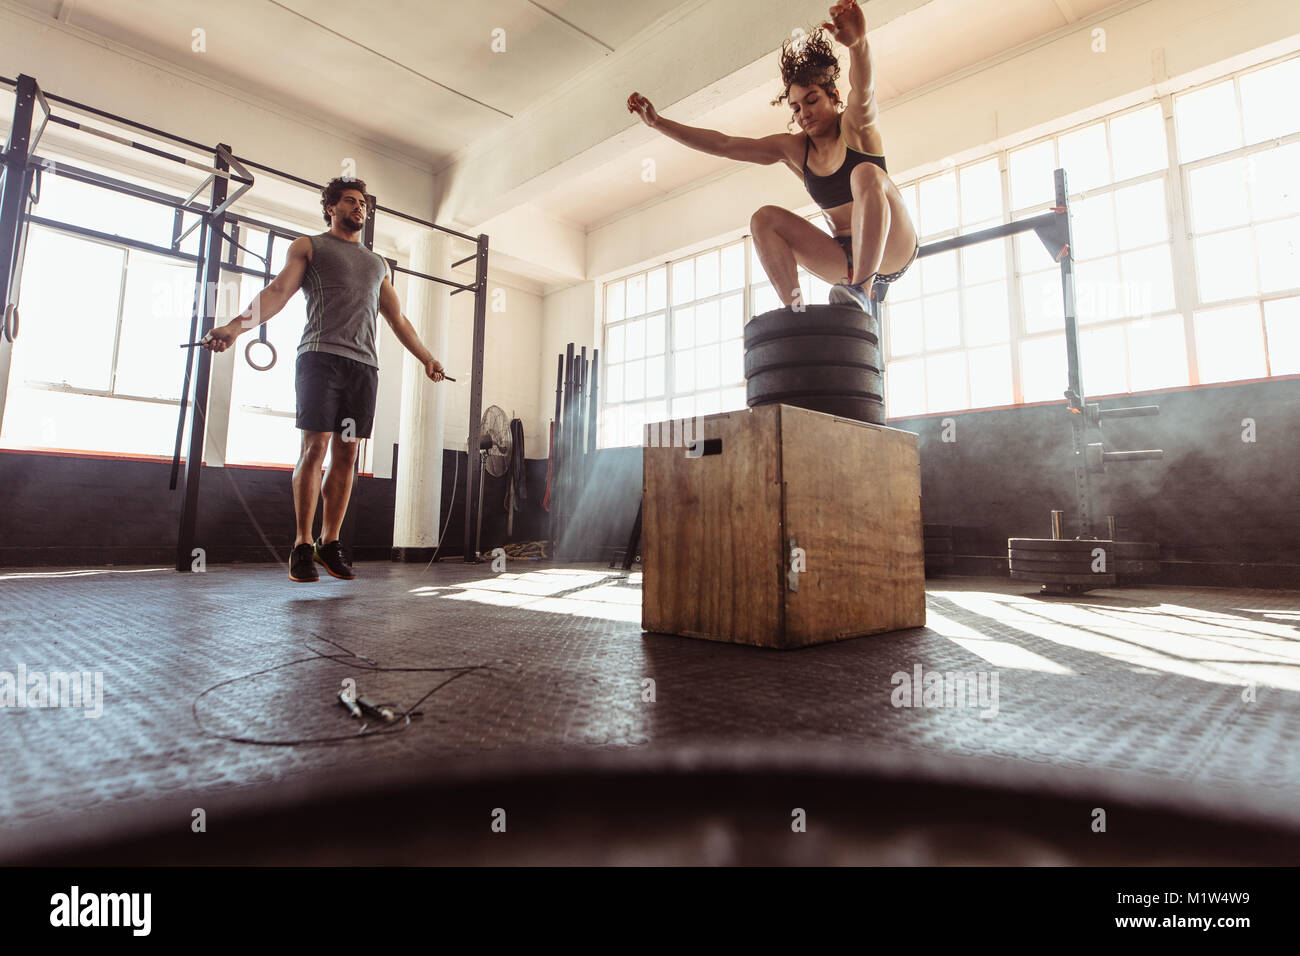 Fit young woman box jumping with man exercising with skipping ropes at a cross training style gym. Young couple training hard at the gym. Stock Photo